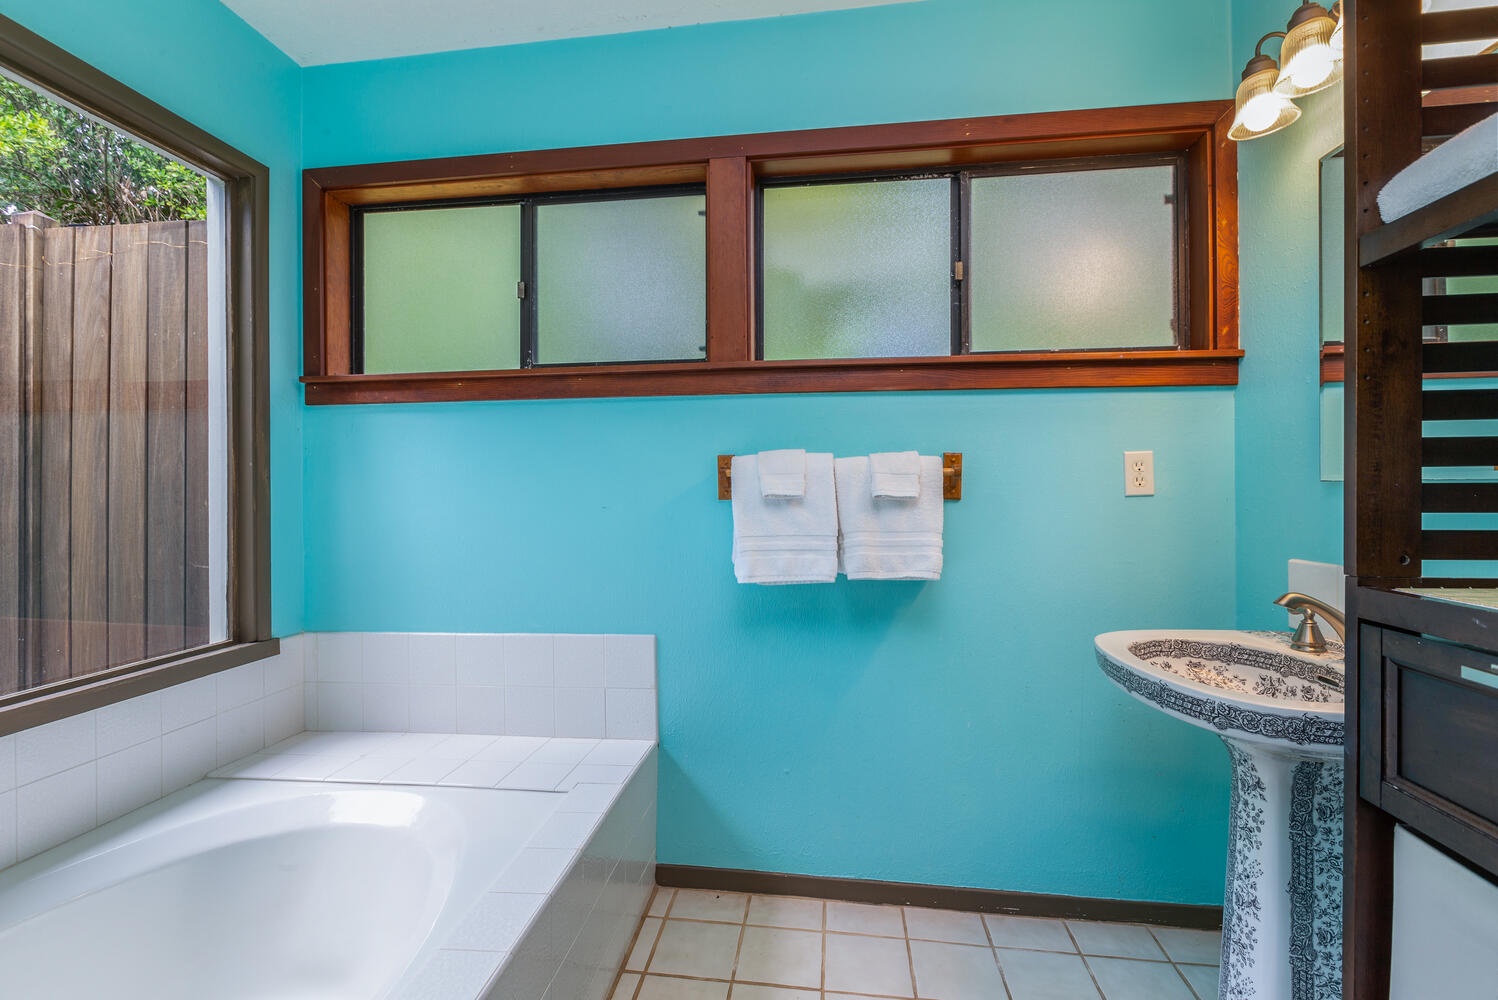 Princeville Vacation Rentals, Ailana Hale - Ensuite primary with tile shower and soaking tub